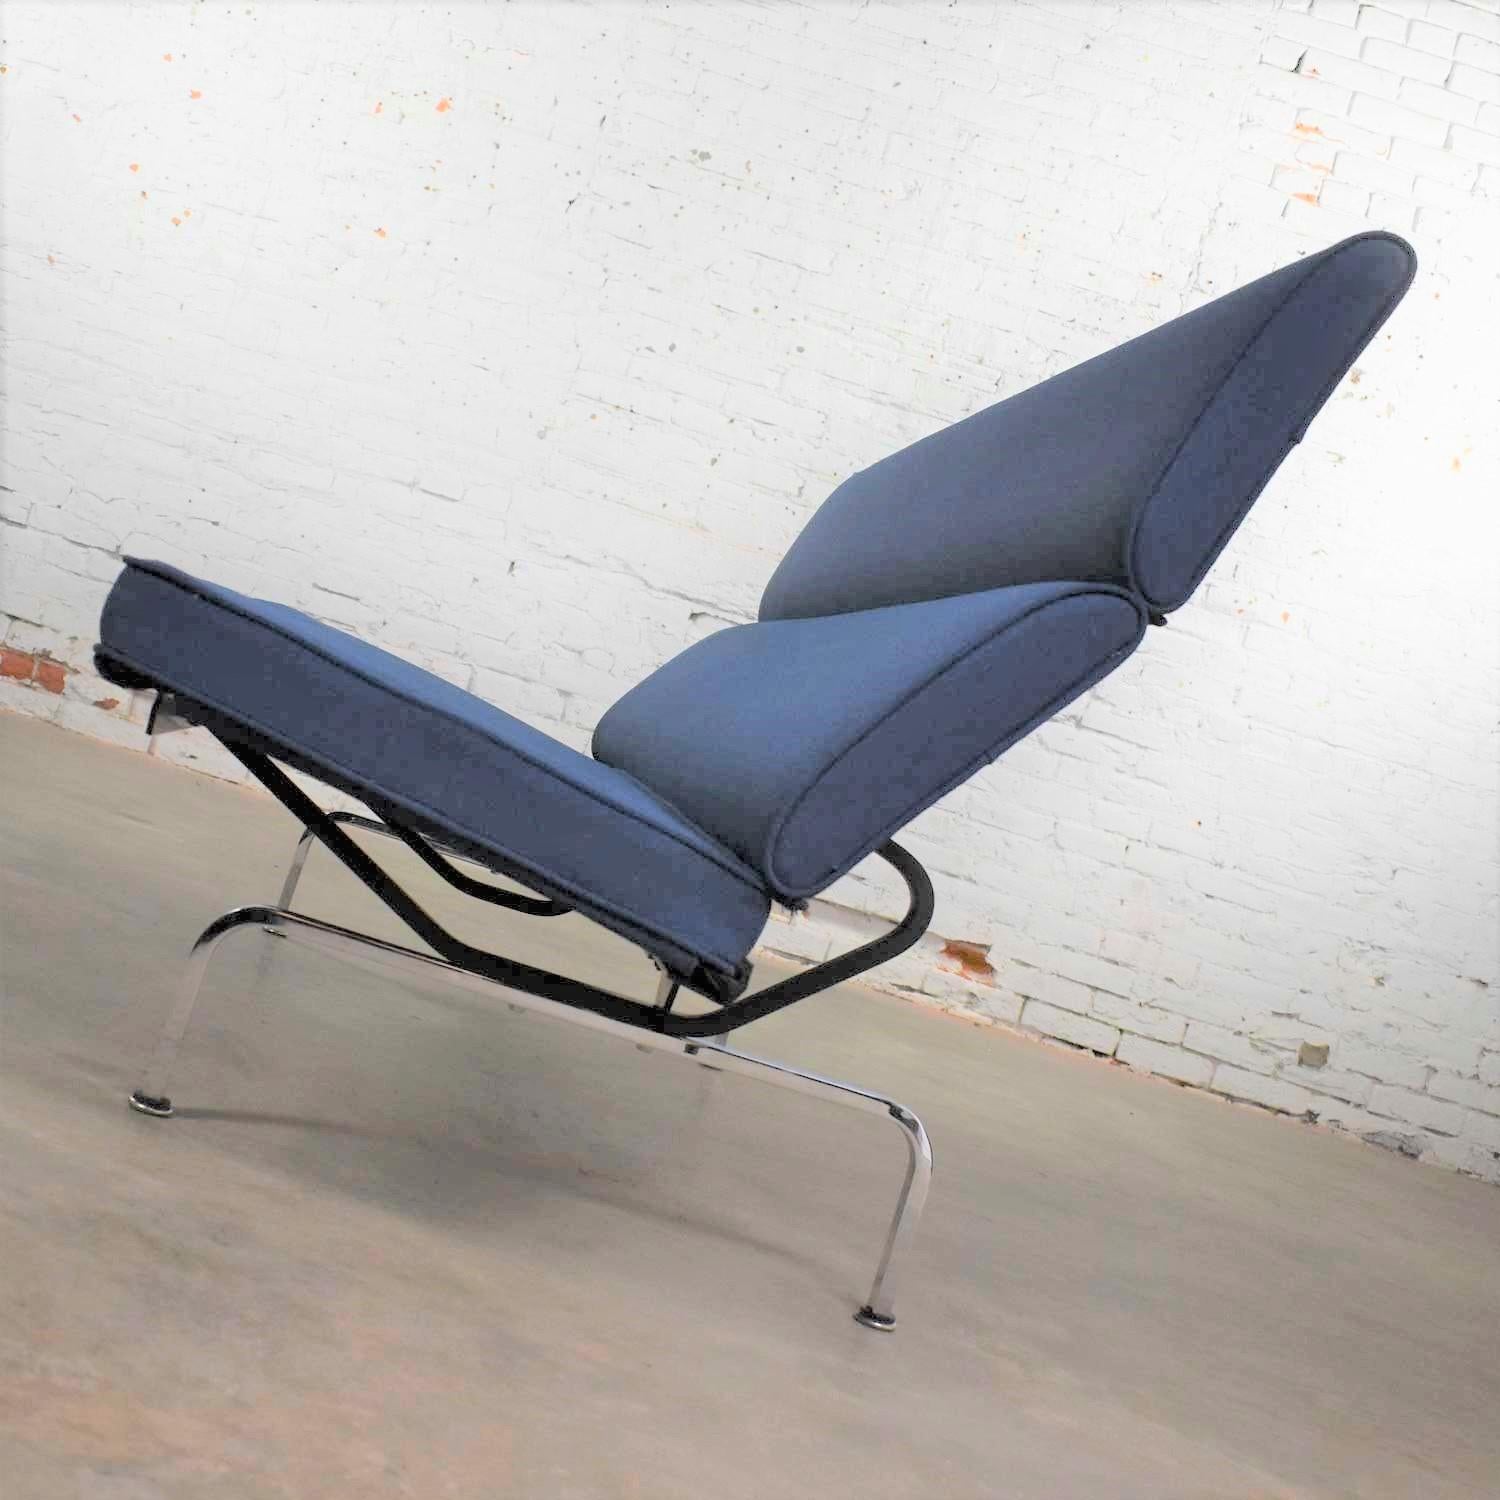 20th Century Vintage Mid-Century Modern Eames Sofa Compact in Blue by Herman Miller